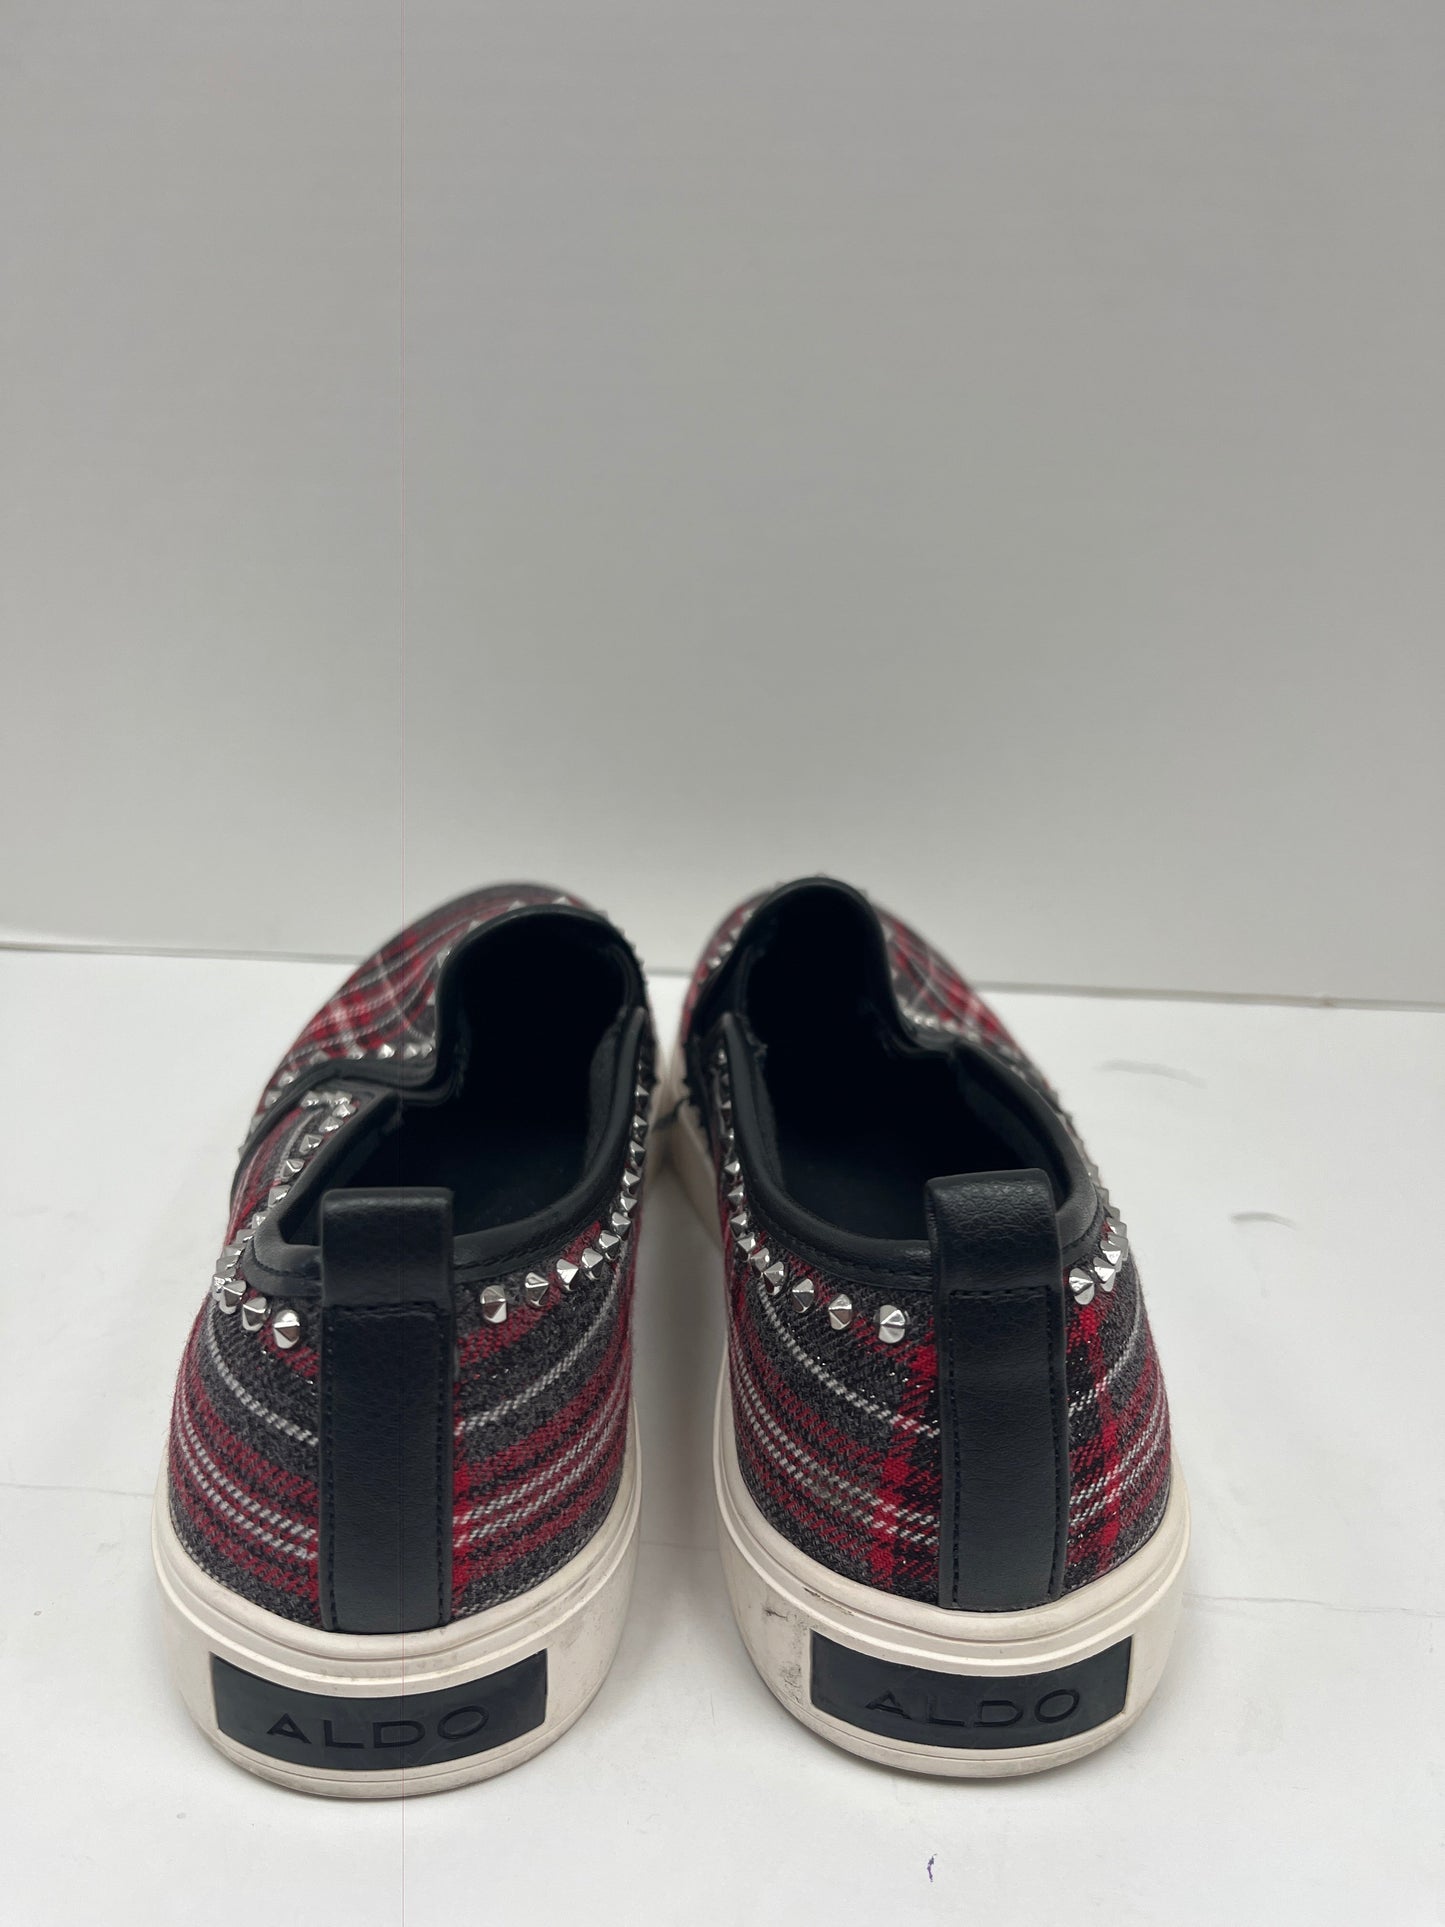 Shoes Sneakers By Aldo  Size: 8